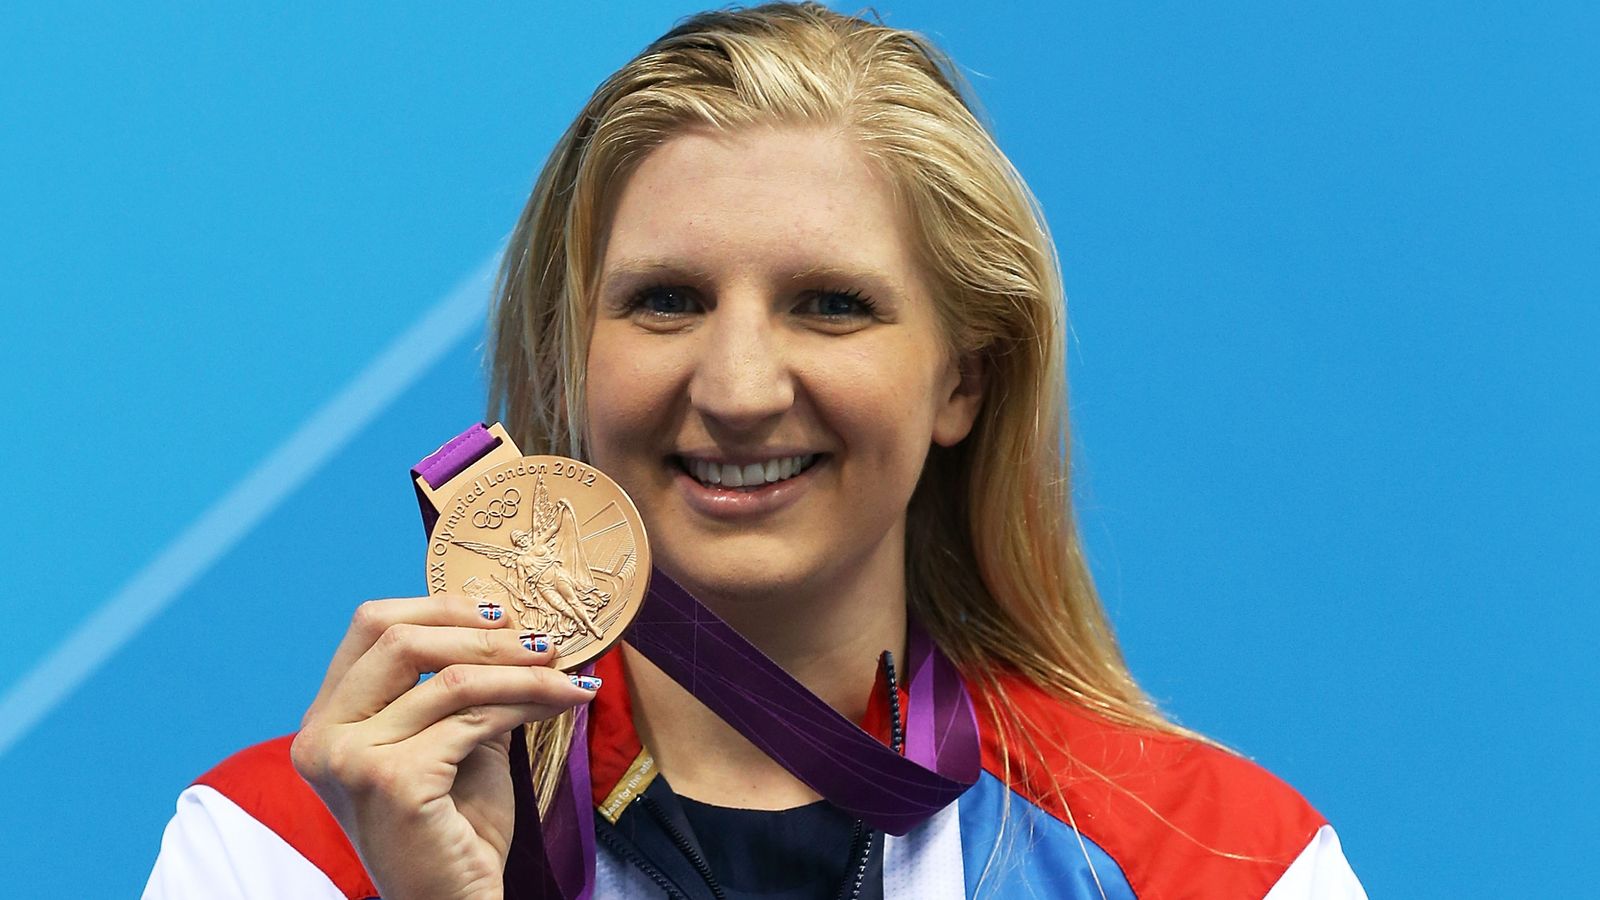 Rebecca Adlington Mental Strength Just As Important As Physical Says Two Time Olympic Gold